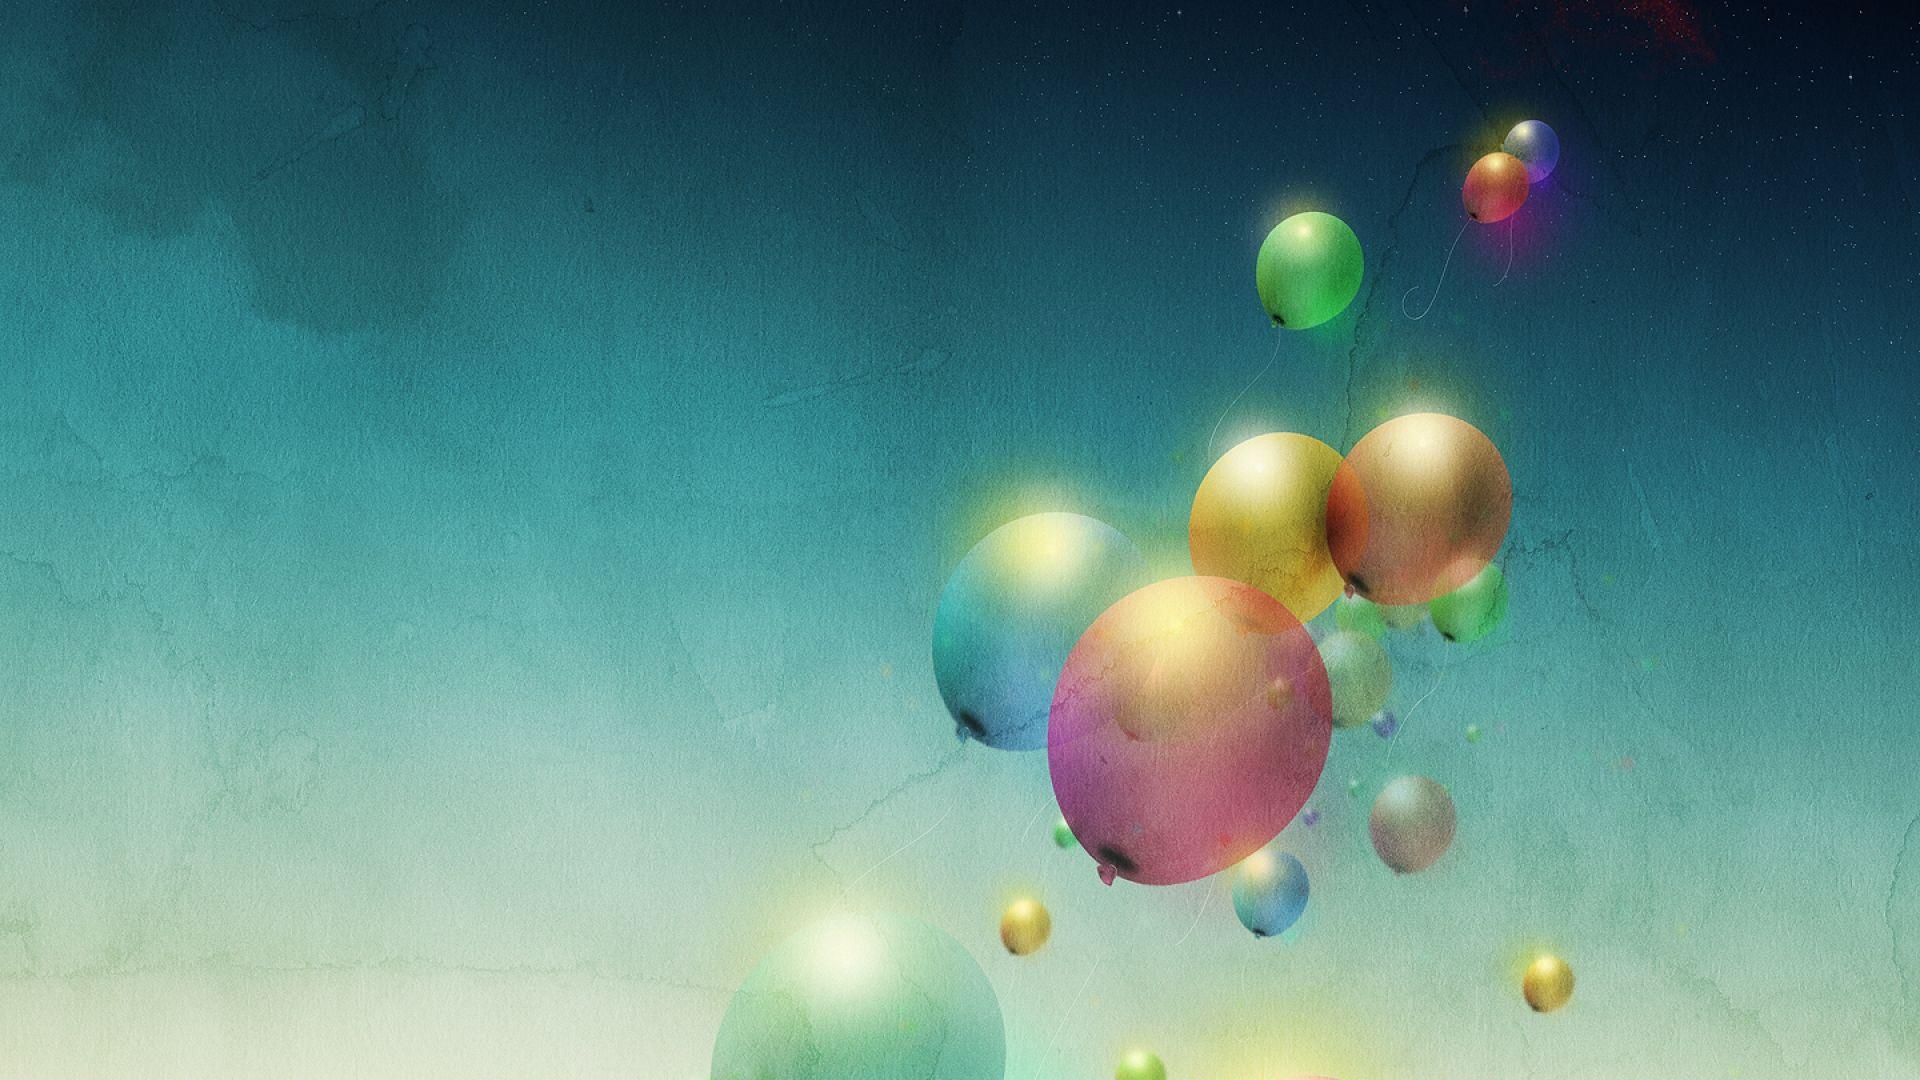 Balloon Wallpapers Wallpaper Cave 46134 Hot Sex Picture